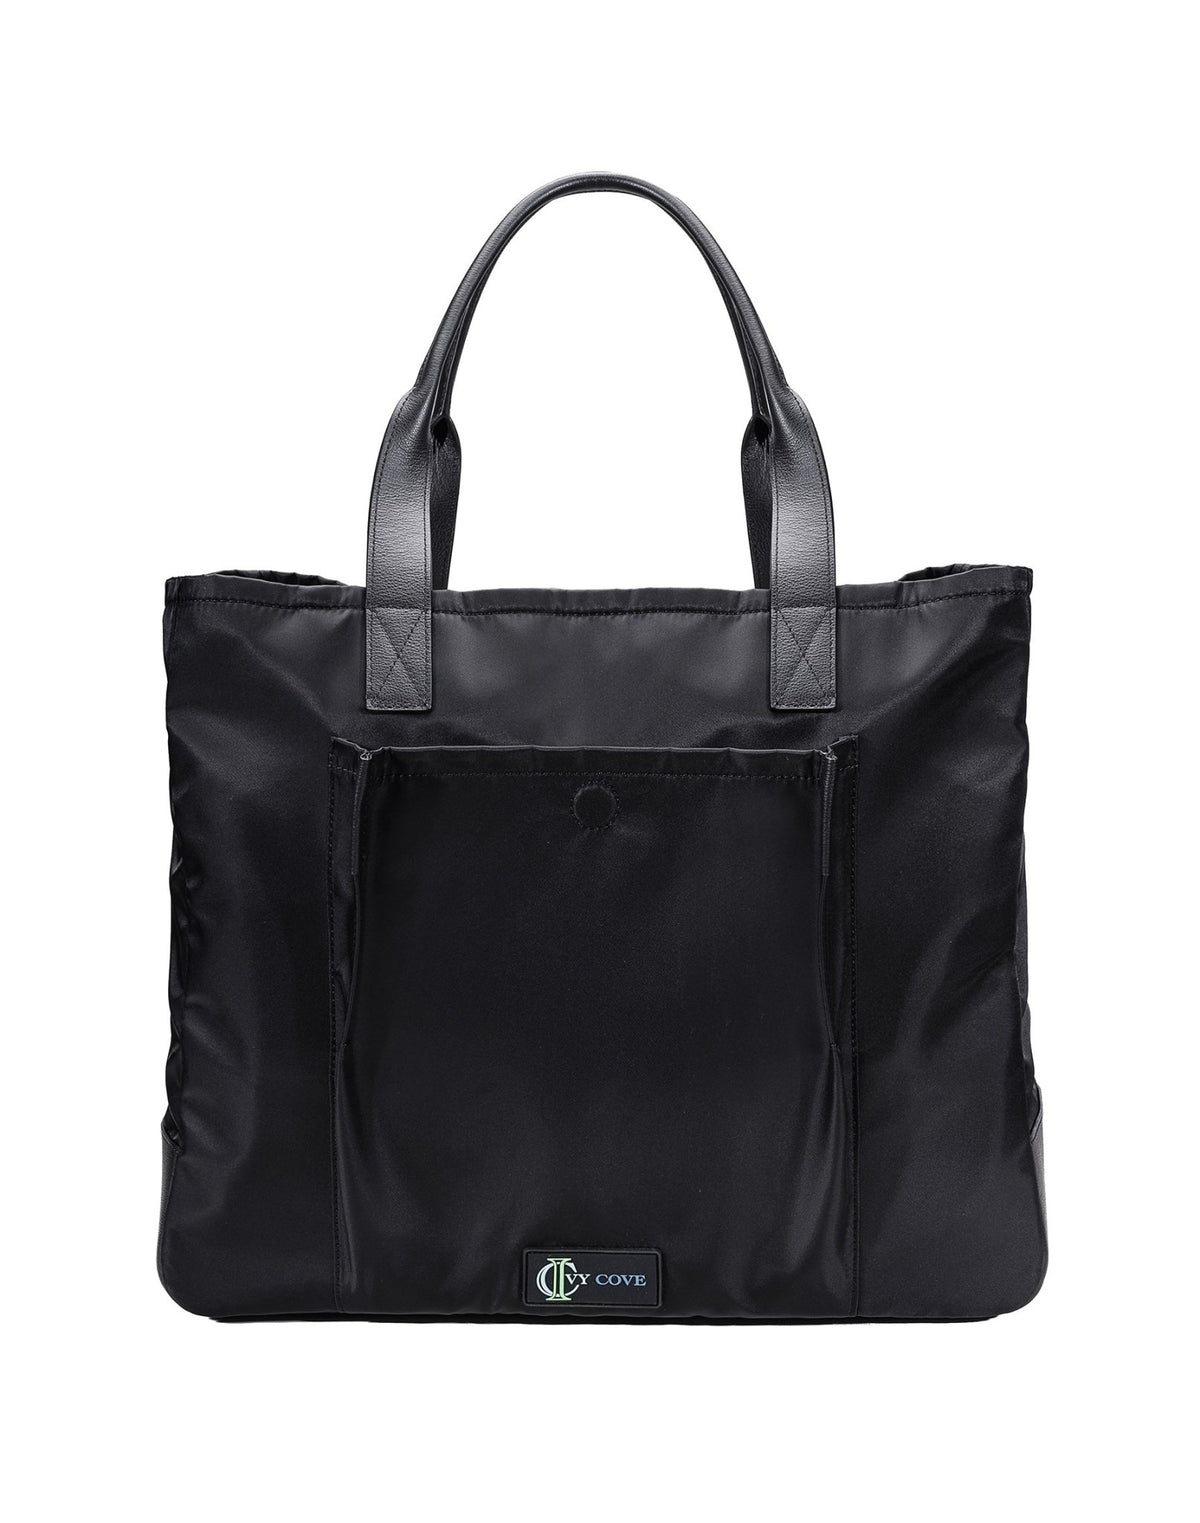 Voyager Tote Bag - Ivy Cove Montecito